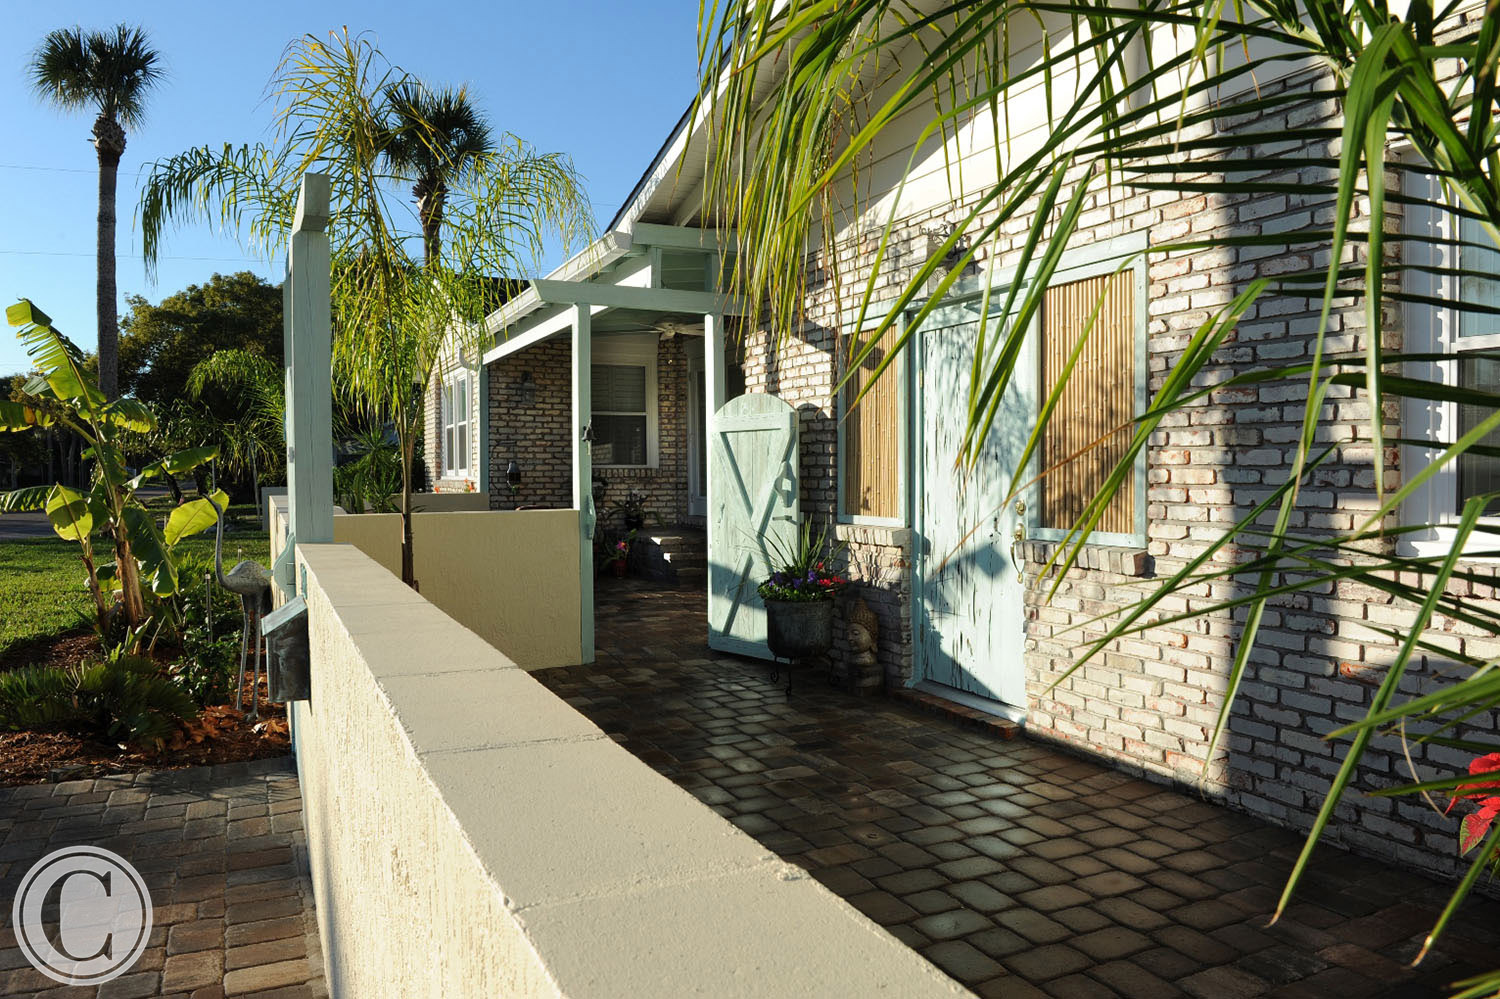 Design-build remodel in Neptune Beach, FL included interior and exterior elements. The homeowner requested that the exterior have a “more island-Balinese look.” ©Mark Sain Wilson Photography